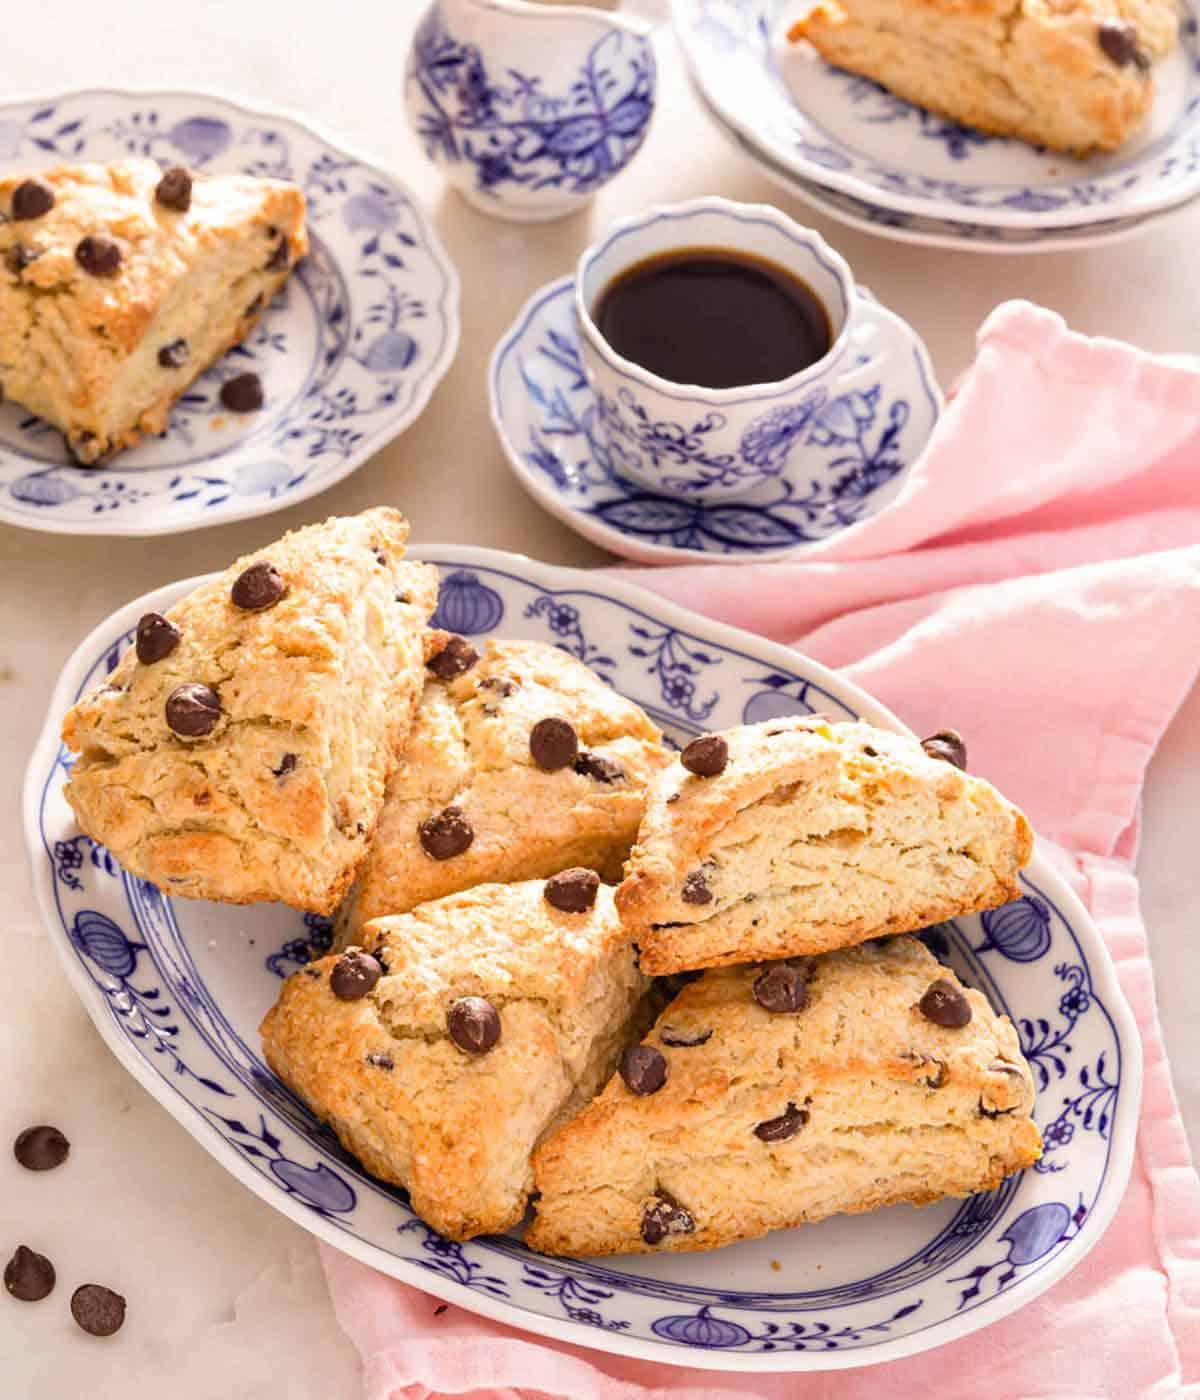 A platter of chocolate chip scones with a cup of coffee and plates with scones behind it.